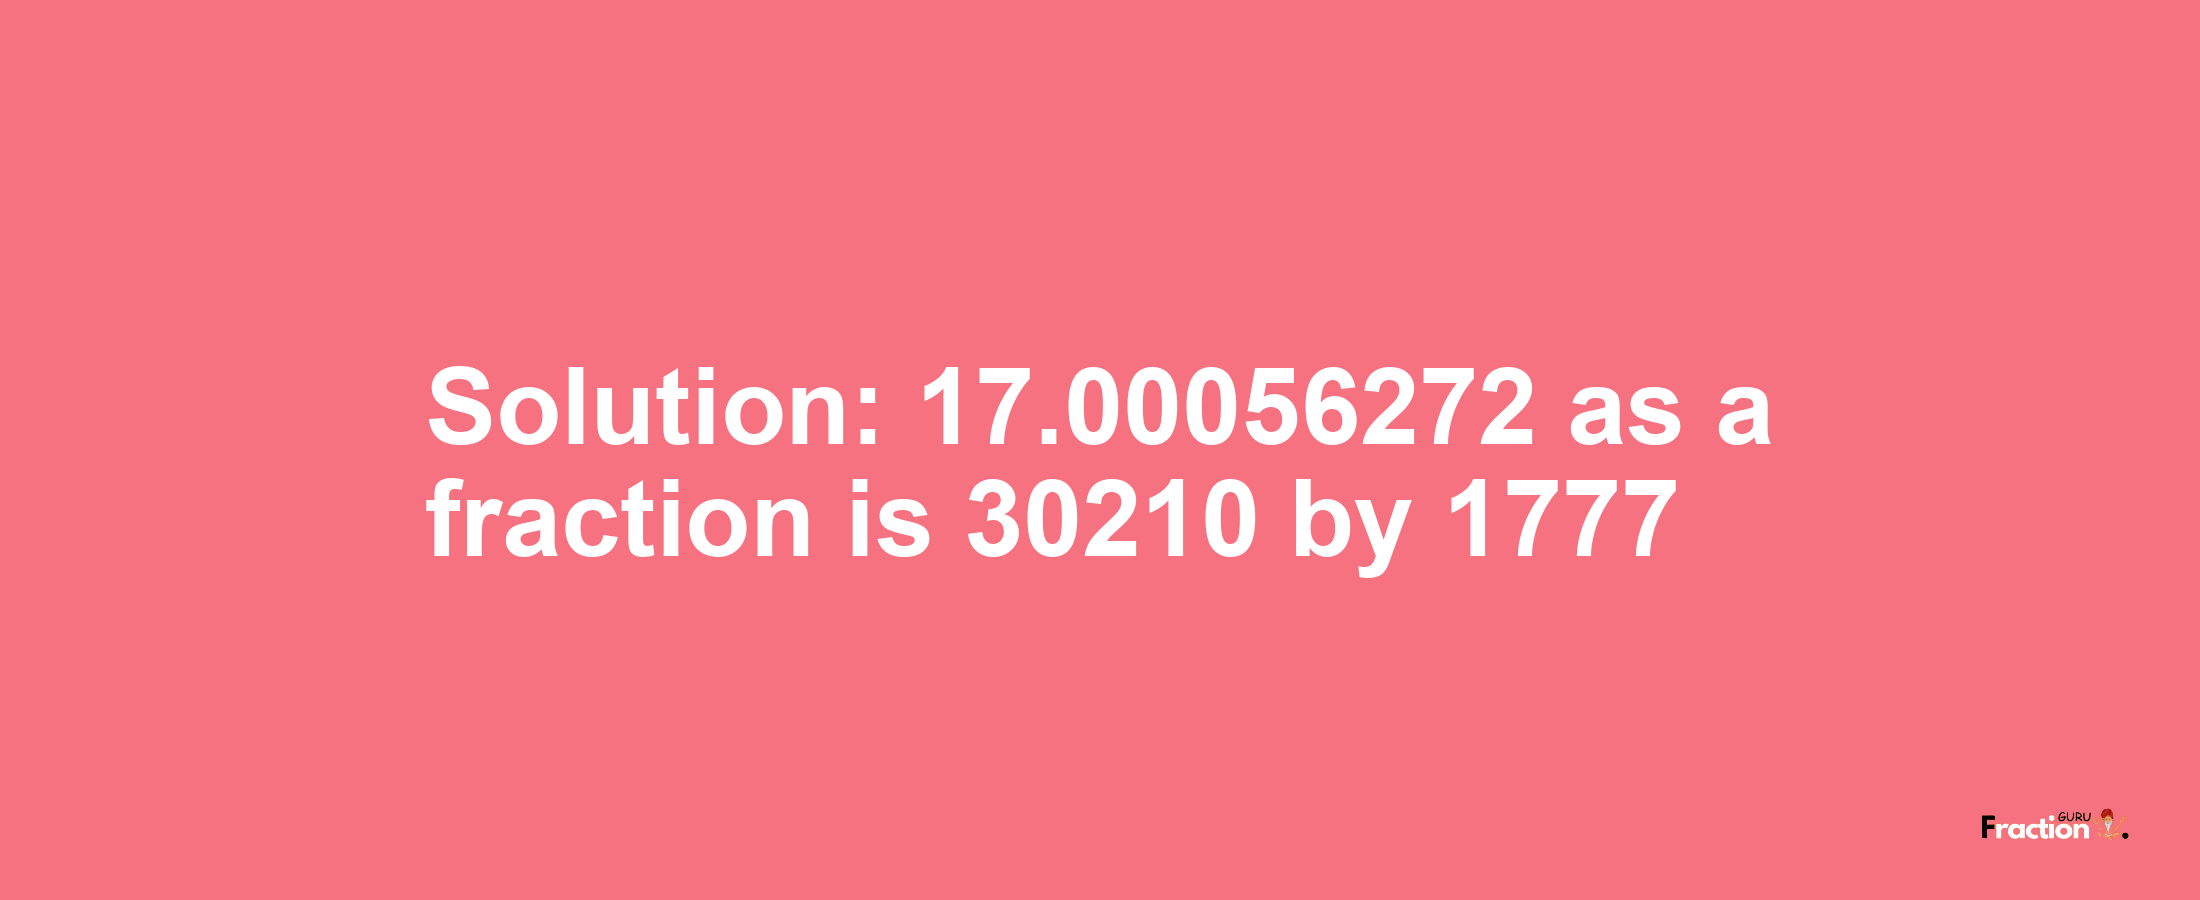 Solution:17.00056272 as a fraction is 30210/1777